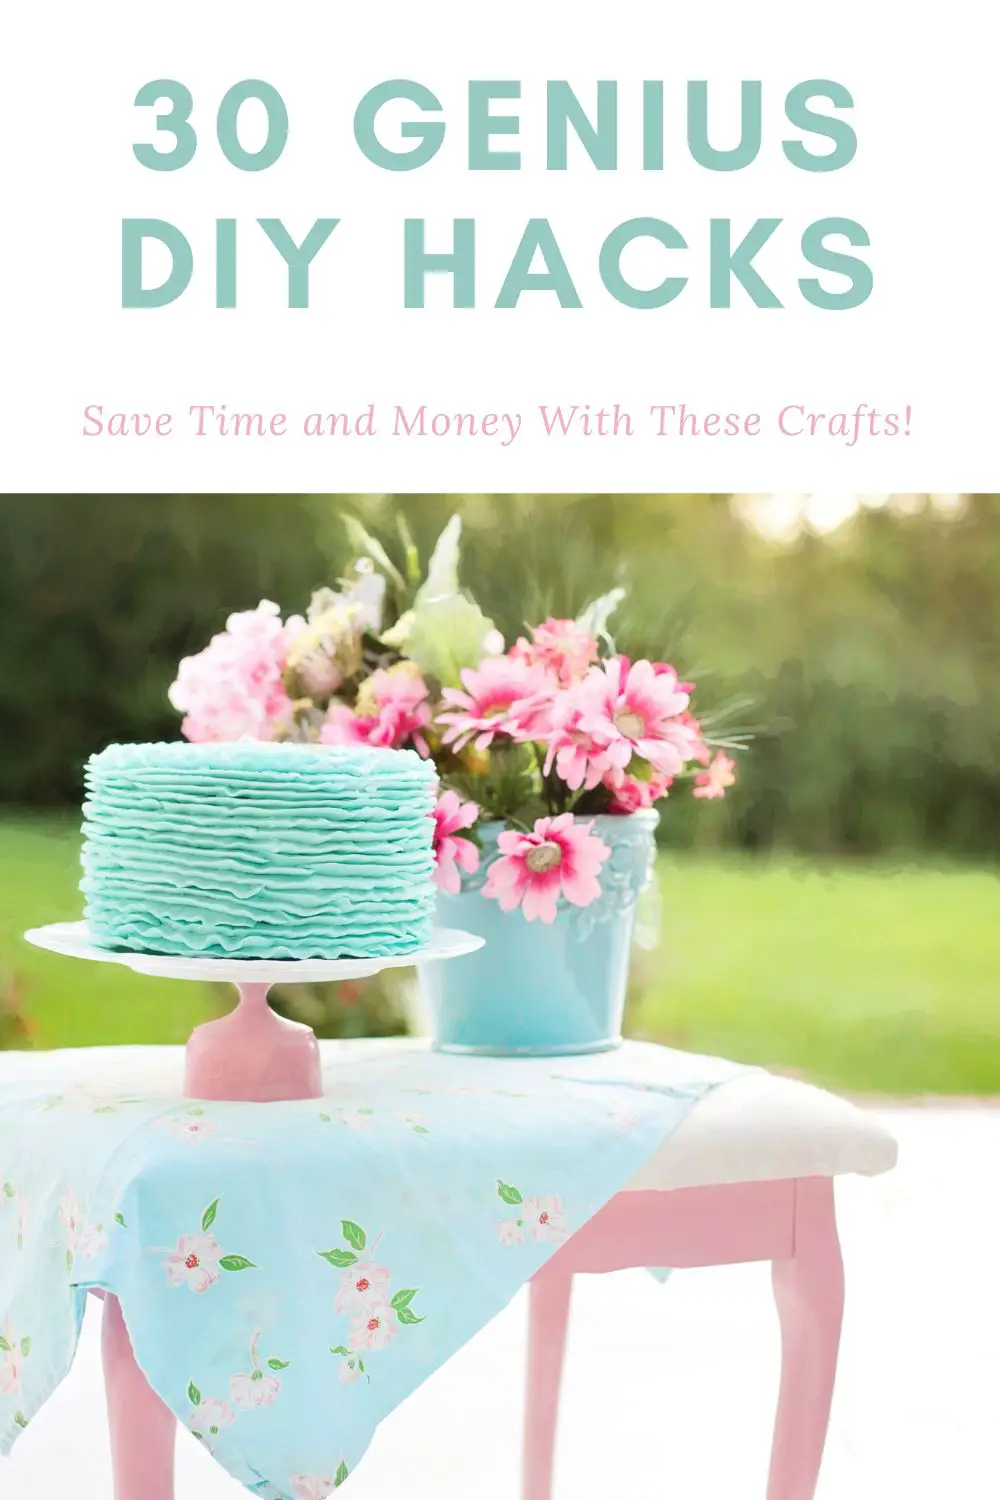 30 GENIUS DIY Hacks Save Time and Money With These Crafts!